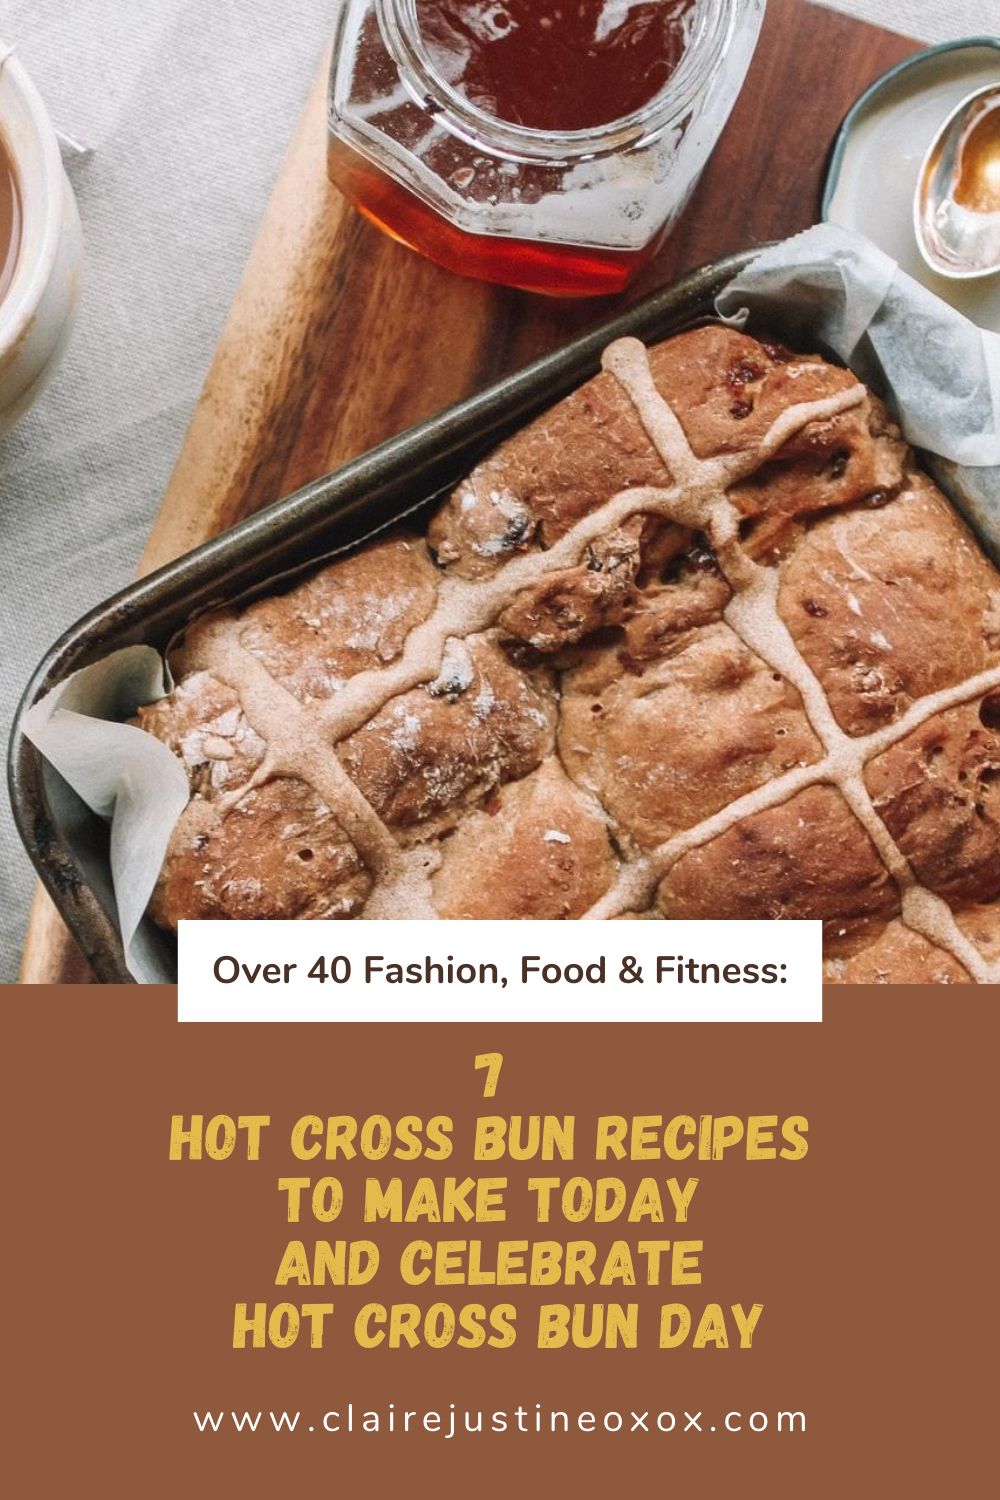 7 Hot Cross Bun Recipes To Make Today And Celebrate